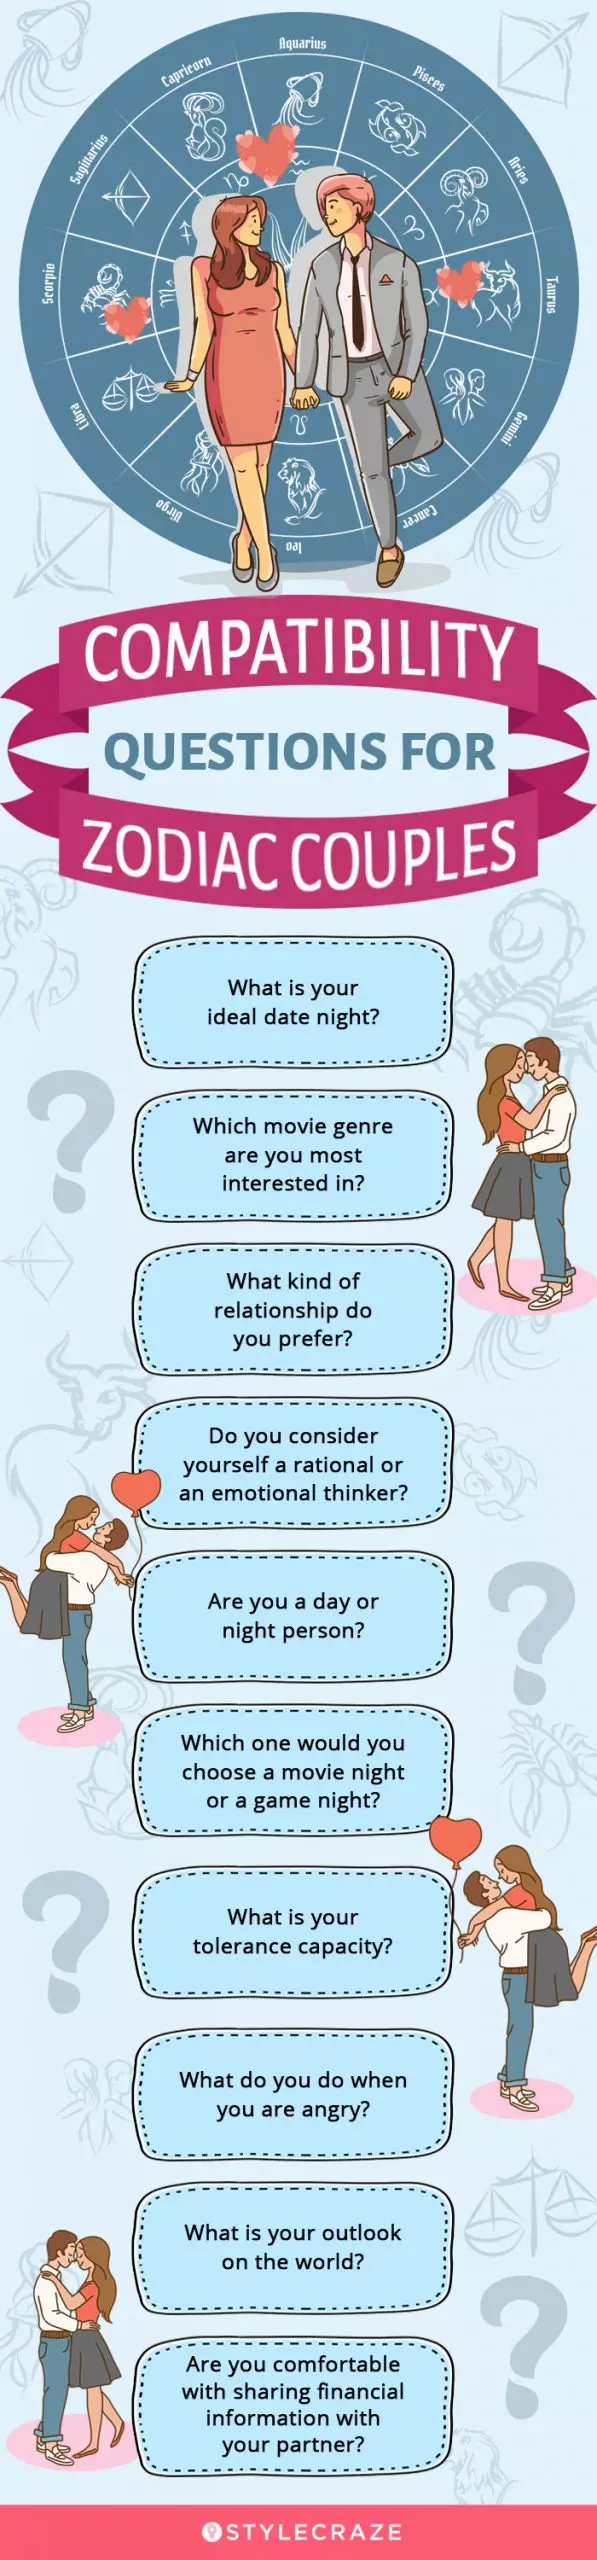 compatibility questions for zodiac couples (infographic)